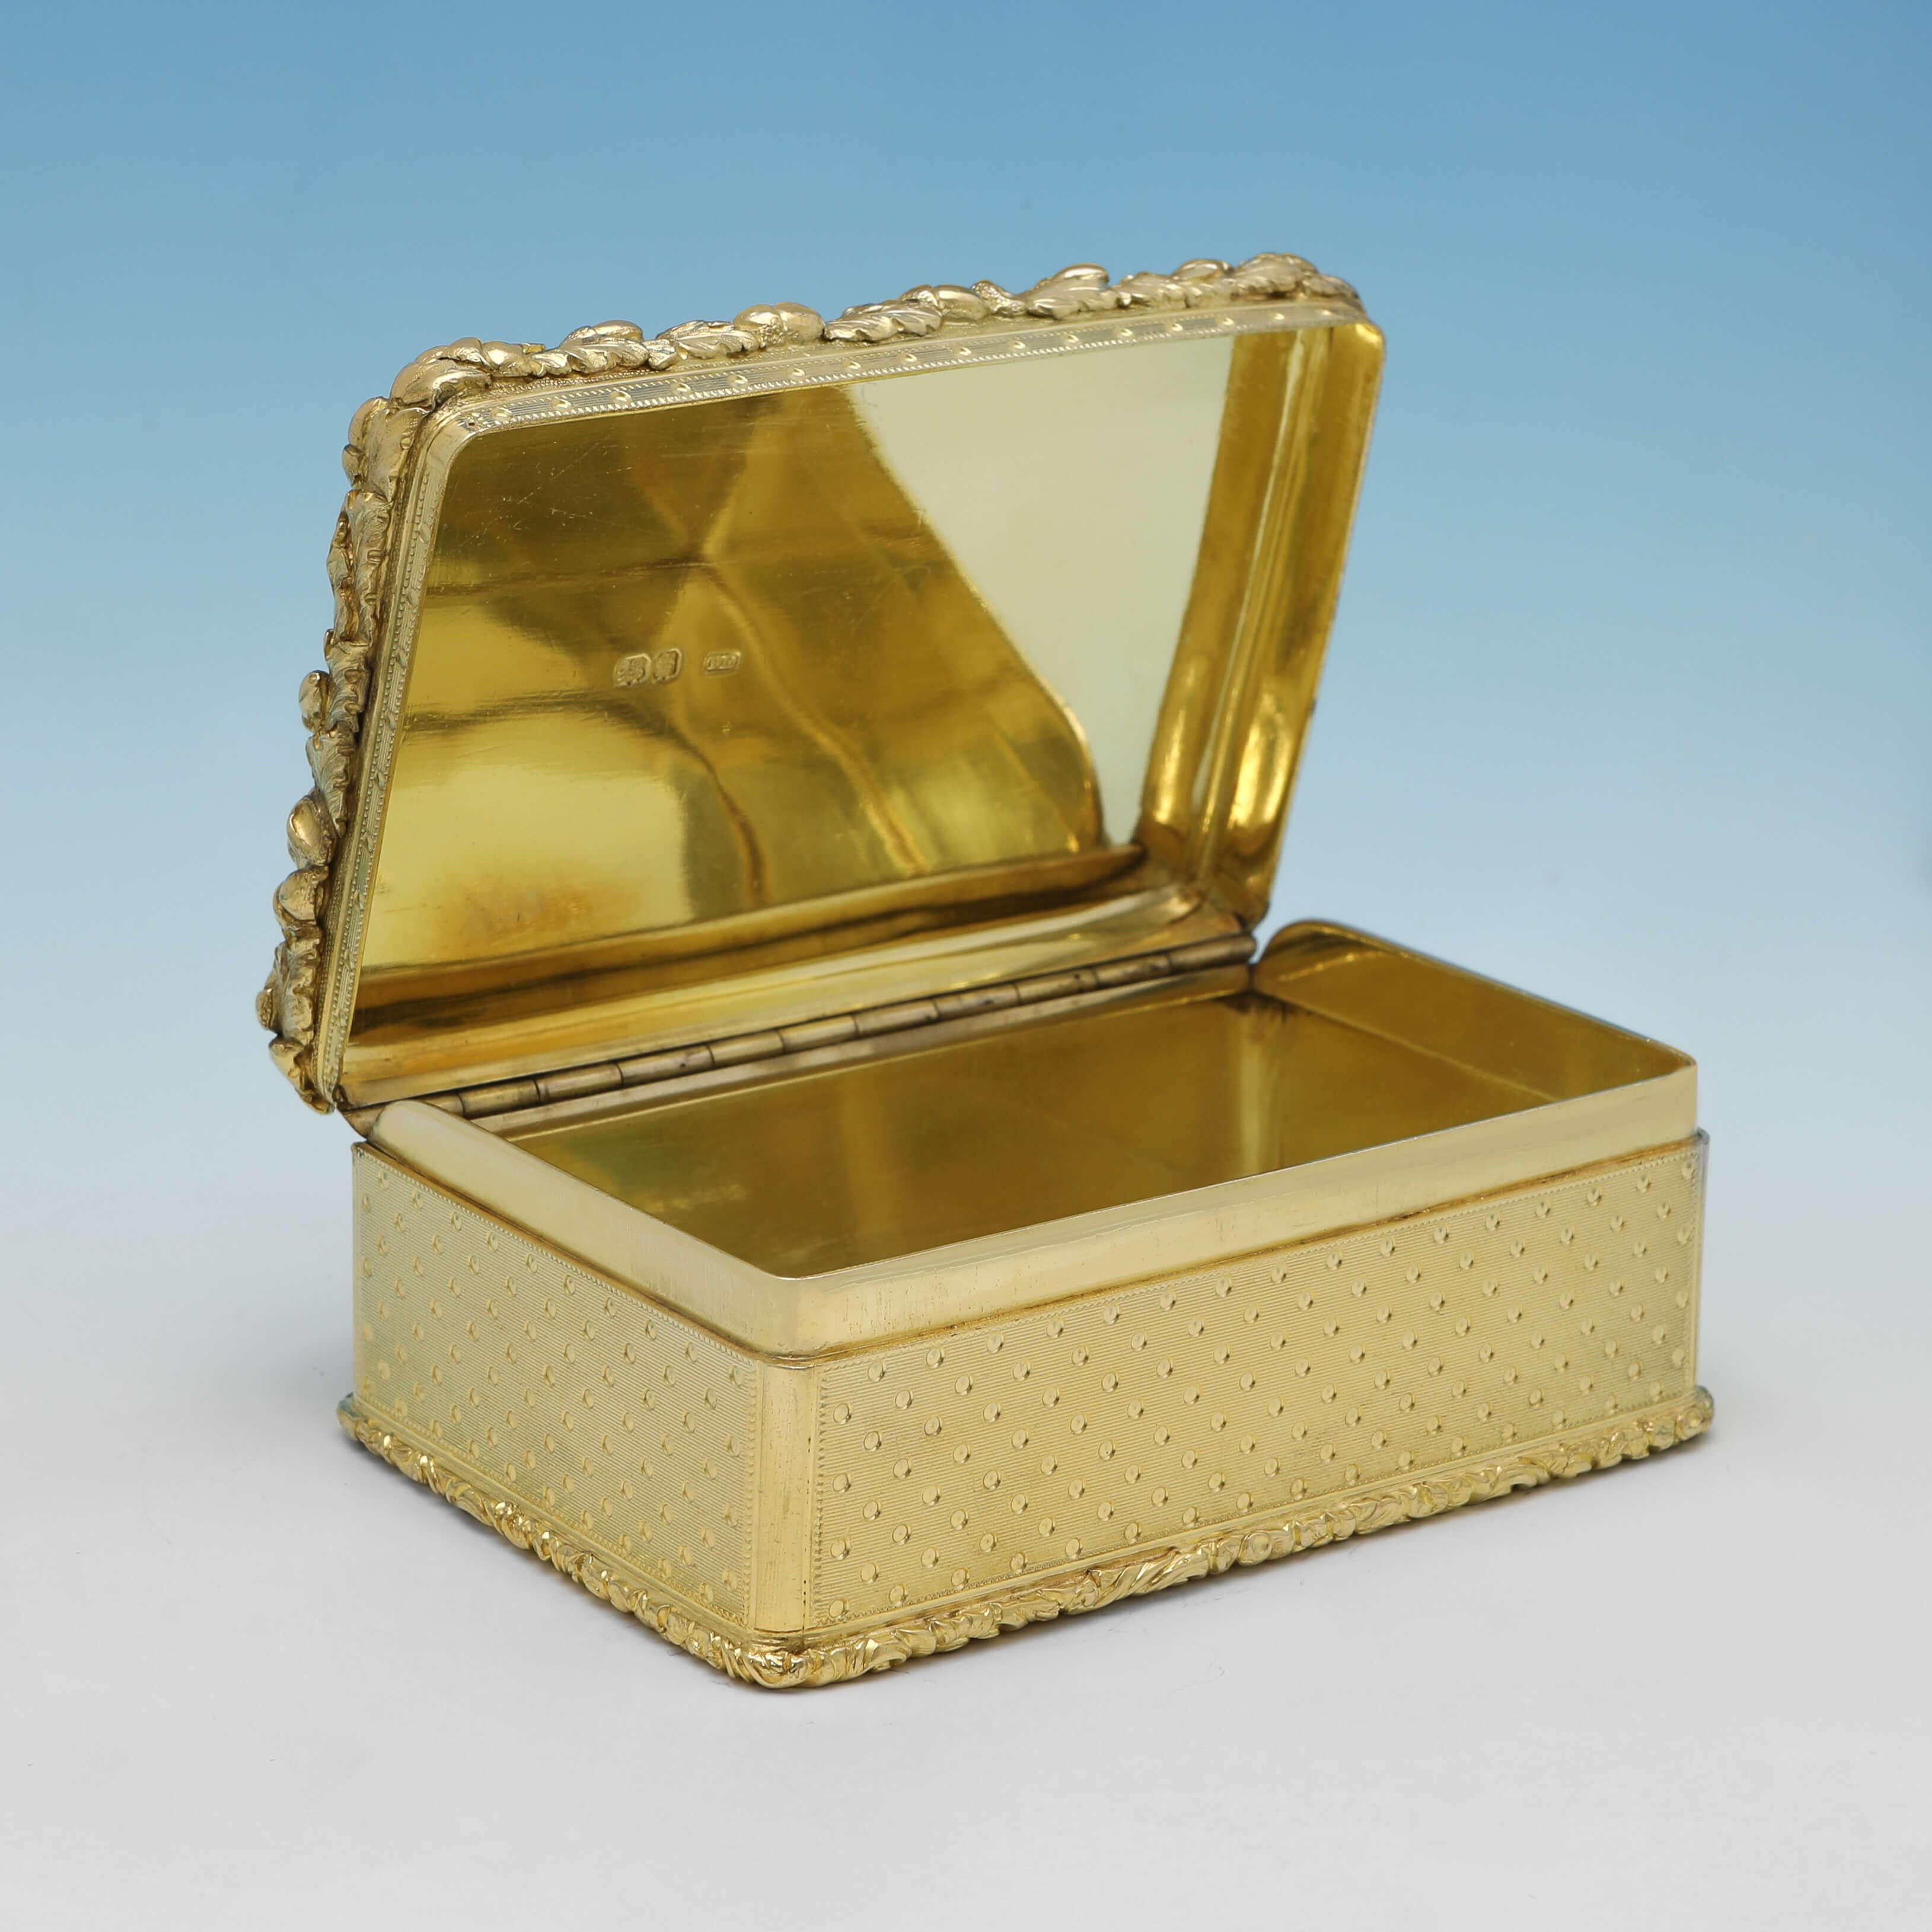 English Stunning Silver Gilt Victorian Table Snuff Box - Hallmarked in London in 1853 For Sale